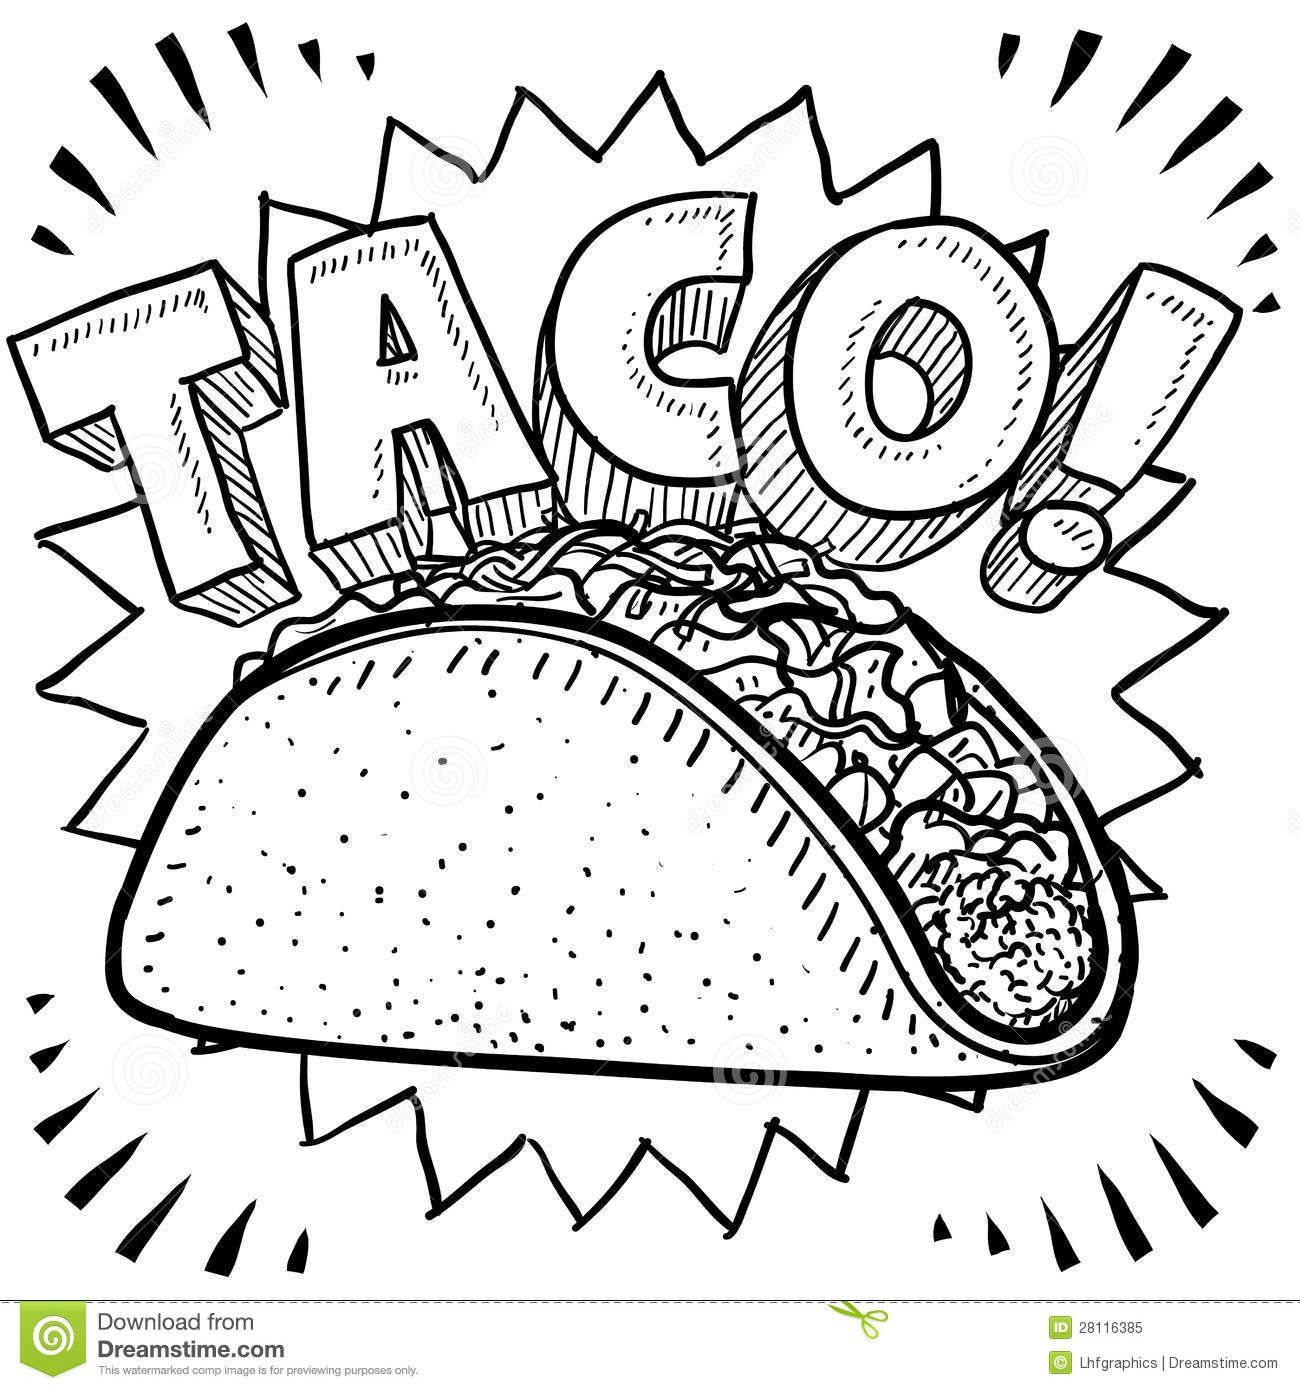 Mexican food clipart black and white